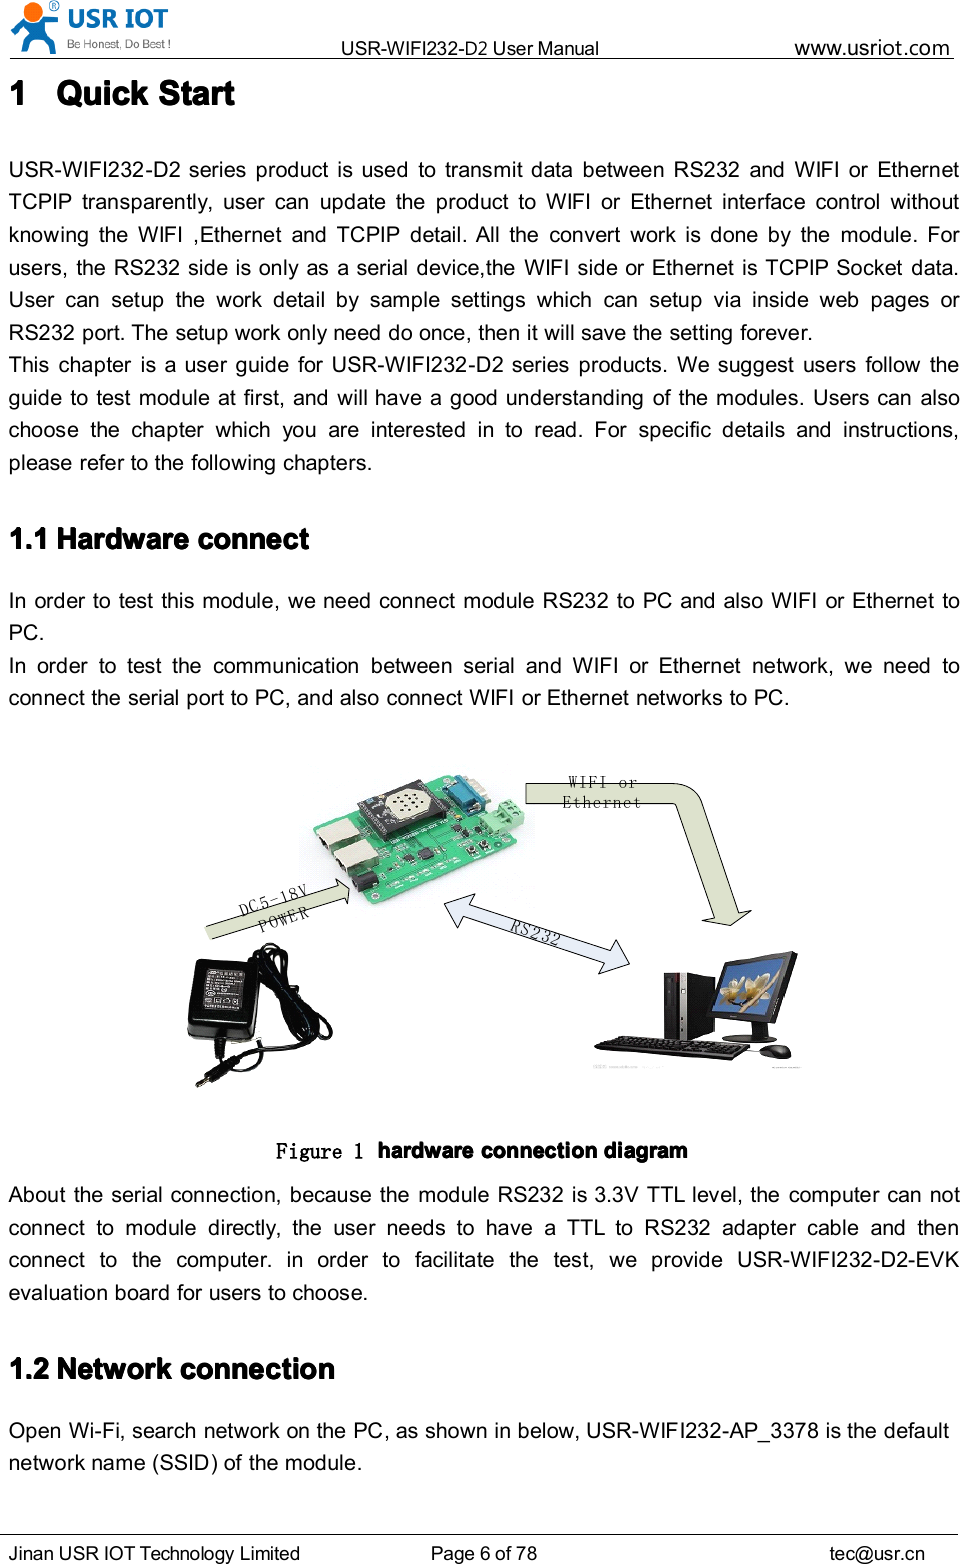 USR-WIFI232- D2 User Manual www.usr iot .comJinan USR IOT Technology Limited Page 6 of 78 tec@usr.cn1111 QuickQuickQuickQuick StartStartStartStartUSR-WIFI232 -D2 series product is used to transm it data between RS232 and WIFI or EthernetTCPIP transparently, user can update the product to WIFI or Ethernet interface control withoutknow ing the WIFI , Ethernet and TCPIP detail. All the convert work is done by the module . F orusers, the RS232 side is only as a serial device,the WIFI side or Ethernet is TCPIP Socket data.User can setup the work detail by sample settings which can setup via inside web pages orRS232 port . T he setup work only need do once, then it will save the setting forever.This chapter is a user guide for USR-WIFI232 -D2 series products. W e suggest users follow theguide to test module at first, and will have a good understanding of the modules. U sers can alsochoose the chapter which you are interested in to read. For specific details and instructions,please refer to the following chapters.1.11.11.11.1 HardwareHardwareHardwareHardware connectconnectconnectconnectIn order to test this module, we need connect module RS232 to PC and also WIFI or Ethernet toPC.In order to test the communication between serial and WIFI or Ethernet network, we need toconnect the serial port to PC, and also connect WIFI or Ethernet networks to PC.DC5-18VPOWERWIFI or EthernetRS232Figure 1 hardwarehardwarehardwarehardware connectionconnectionconnectionconnection diagramdiagramdiagramdiagramAbout the serial connection, because the module RS232 is 3.3V TTL lev el, the computer can notconnect to module directly, the user needs to have a TTL to RS232 adapter cable and thenconnect to the computer. in order to facilitate the test, we provide USR-WIFI232- D2-EVKevaluation board for users to choose.1.21.21.21.2 NetworkNetworkNetworkNetwork connectionconnectionconnectionconnectionOpen Wi-Fi, search network on the PC , as shown in below, USR-WIFI232- AP_3378 is the defaultnetwork name (SSID) of the module.